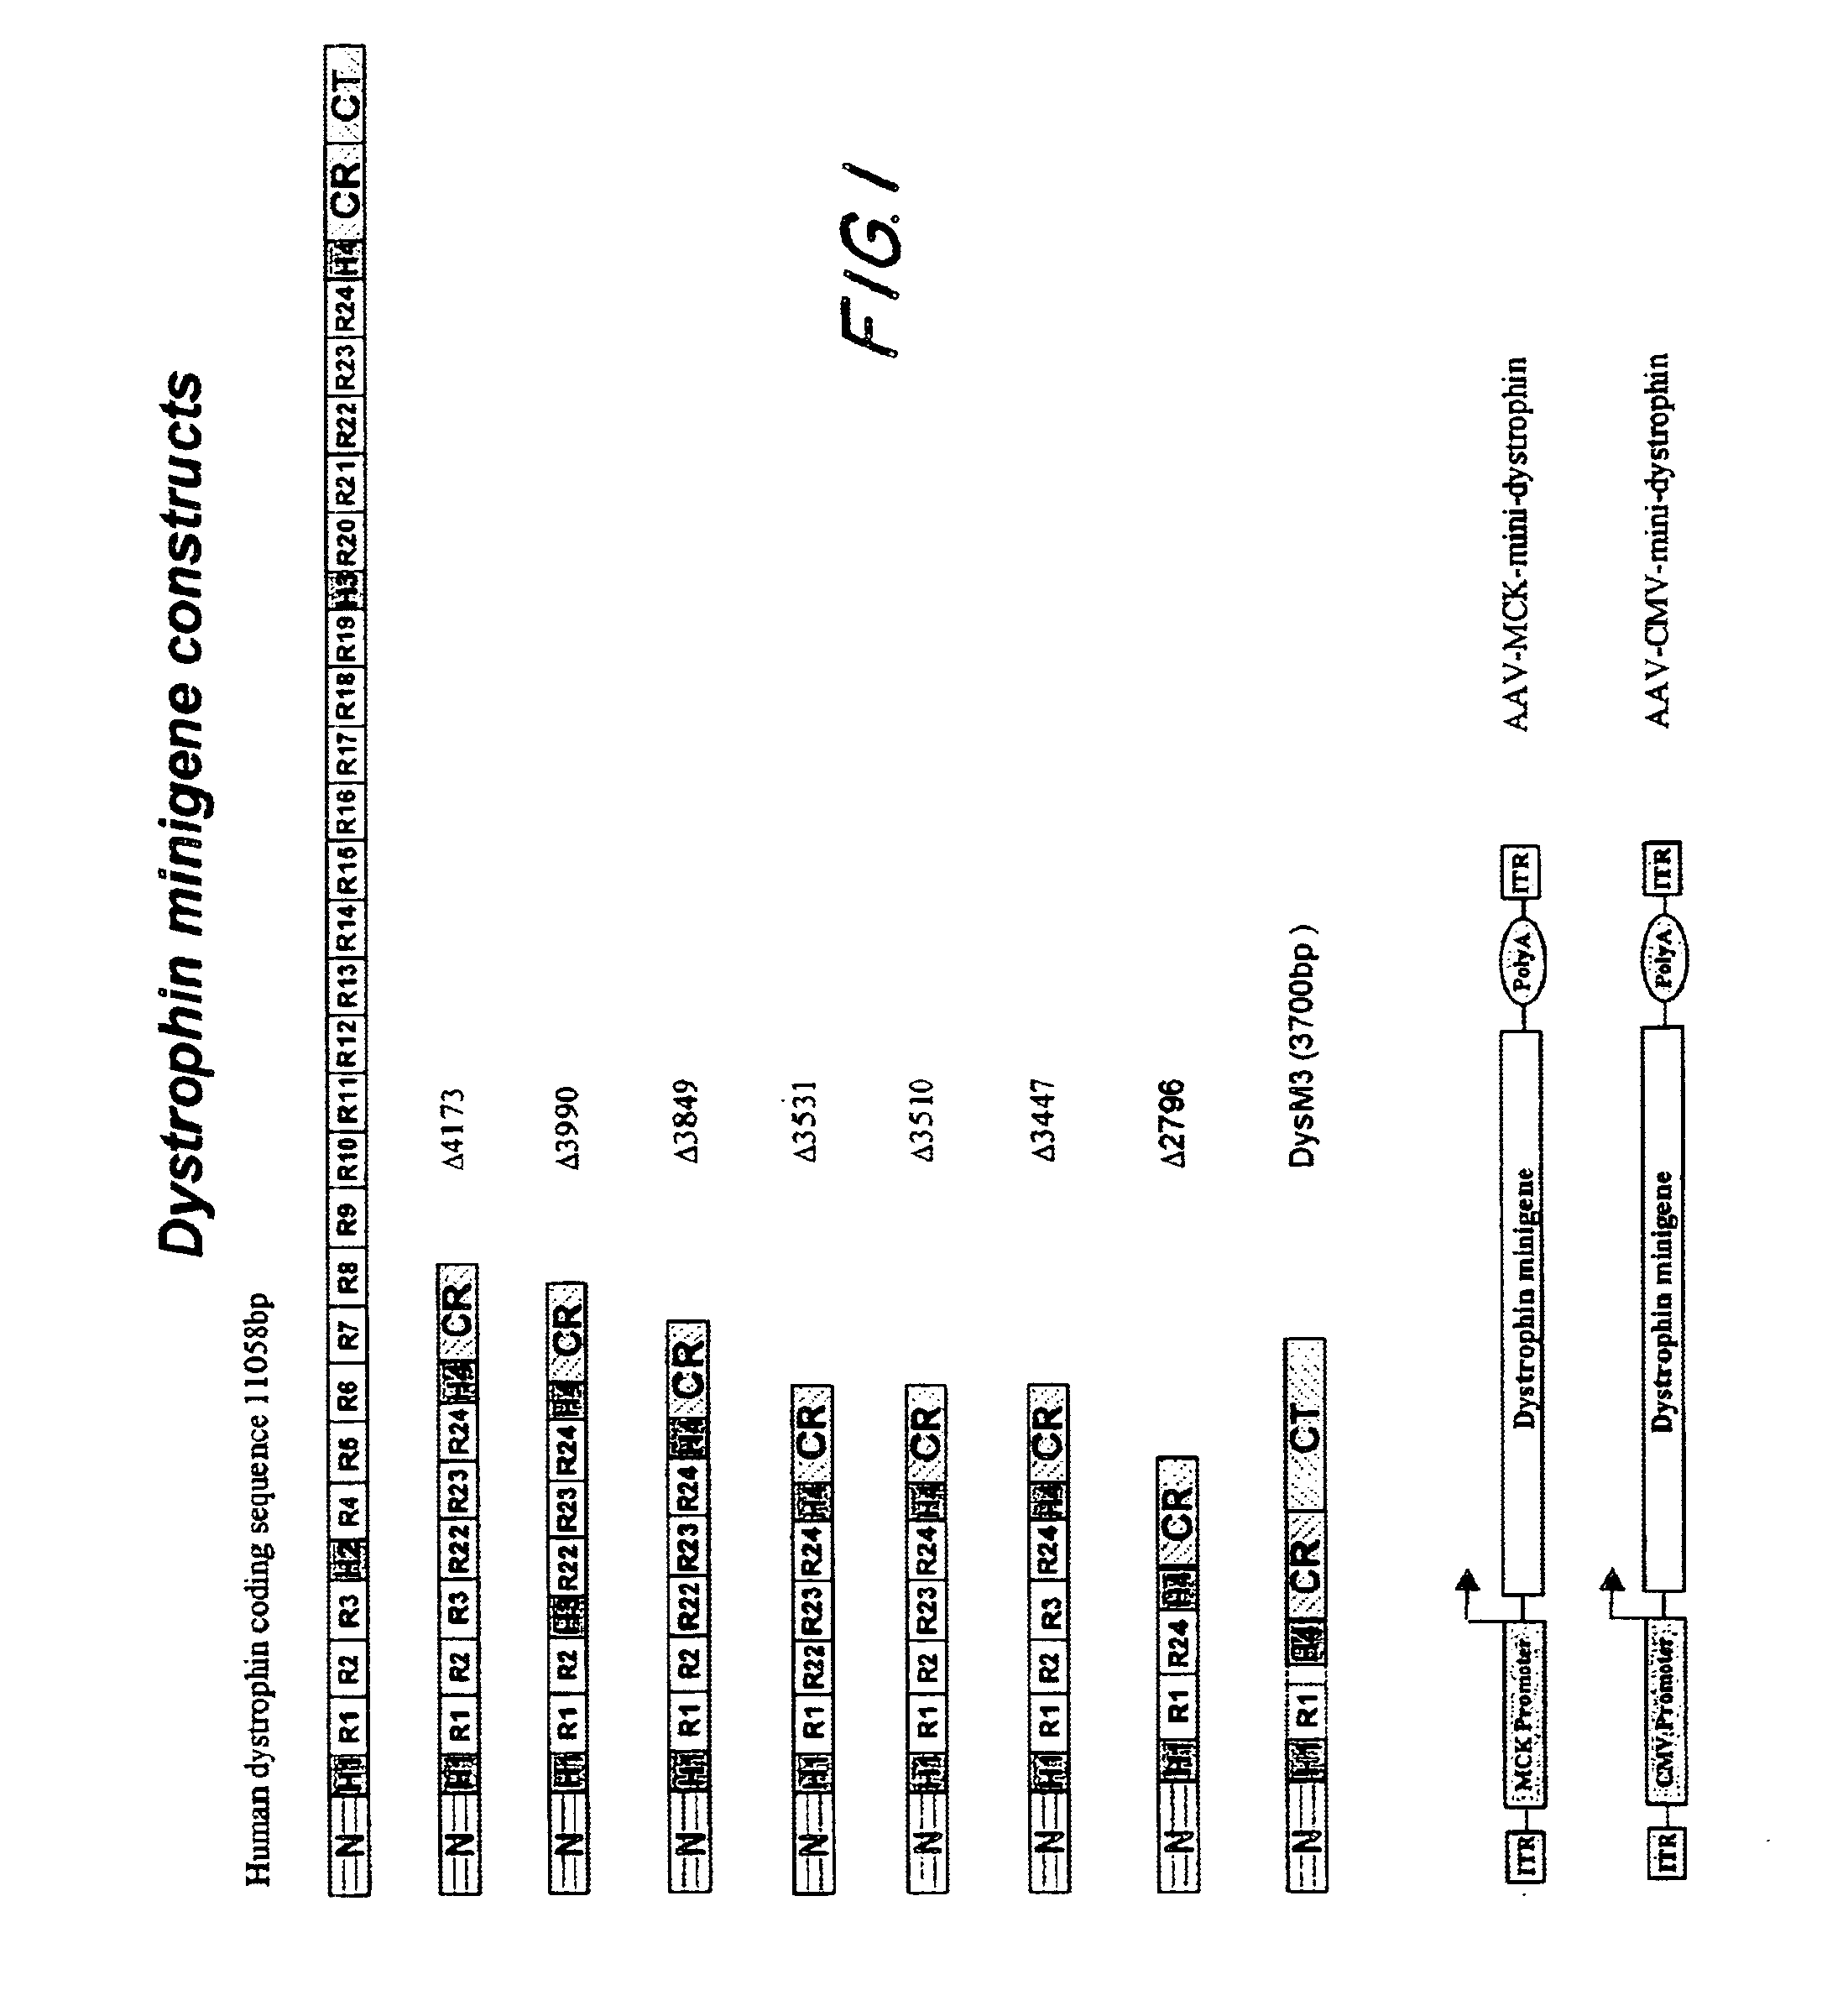 DNA sequences comprising dystrophin minigenes and methods of use thereof